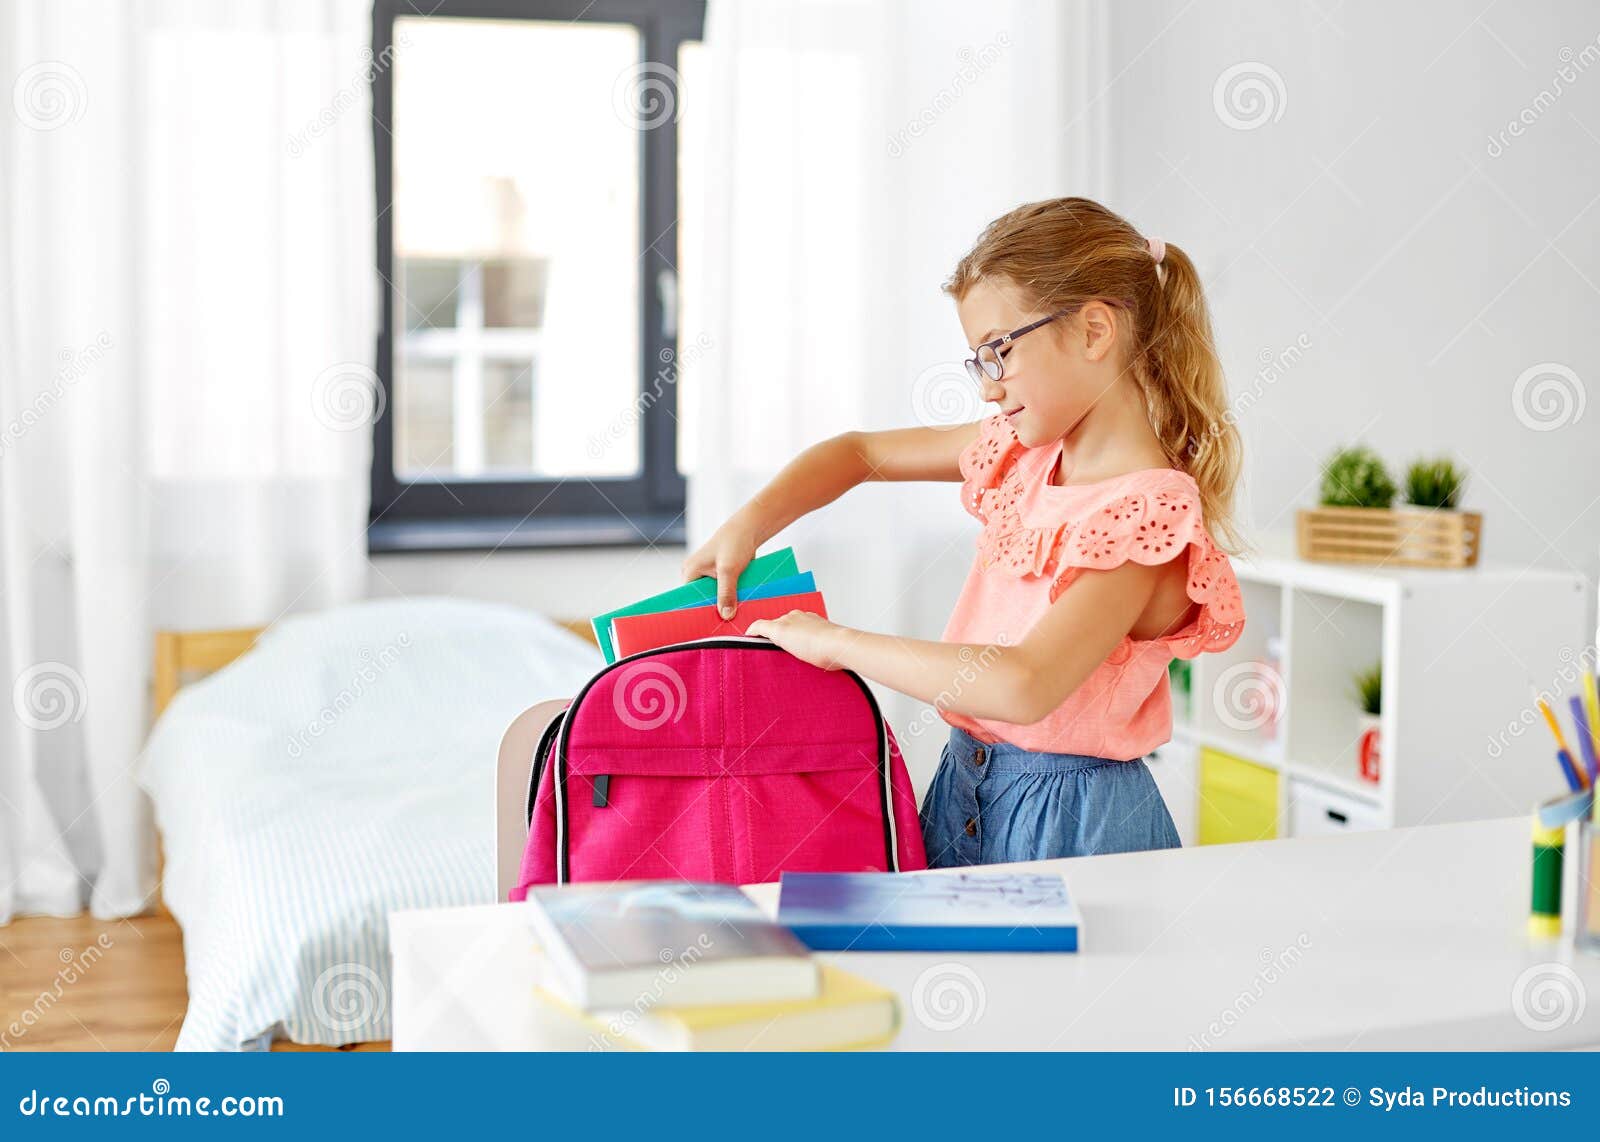 Packing her backpack for school Stock Photos and Images